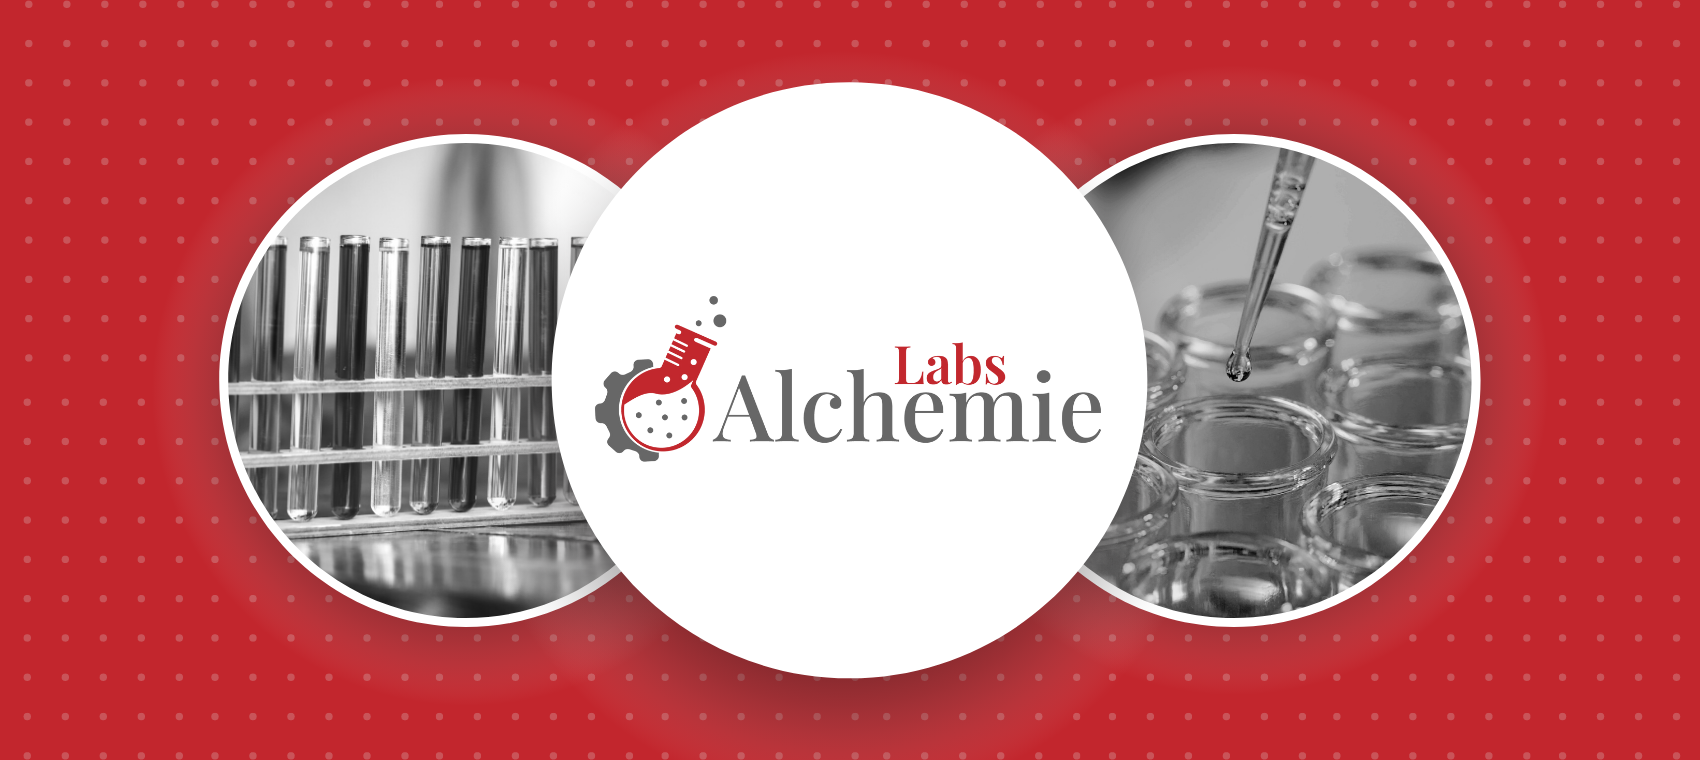 Alchemie Labs explains the most commonly used grades for chemicals and reagents.